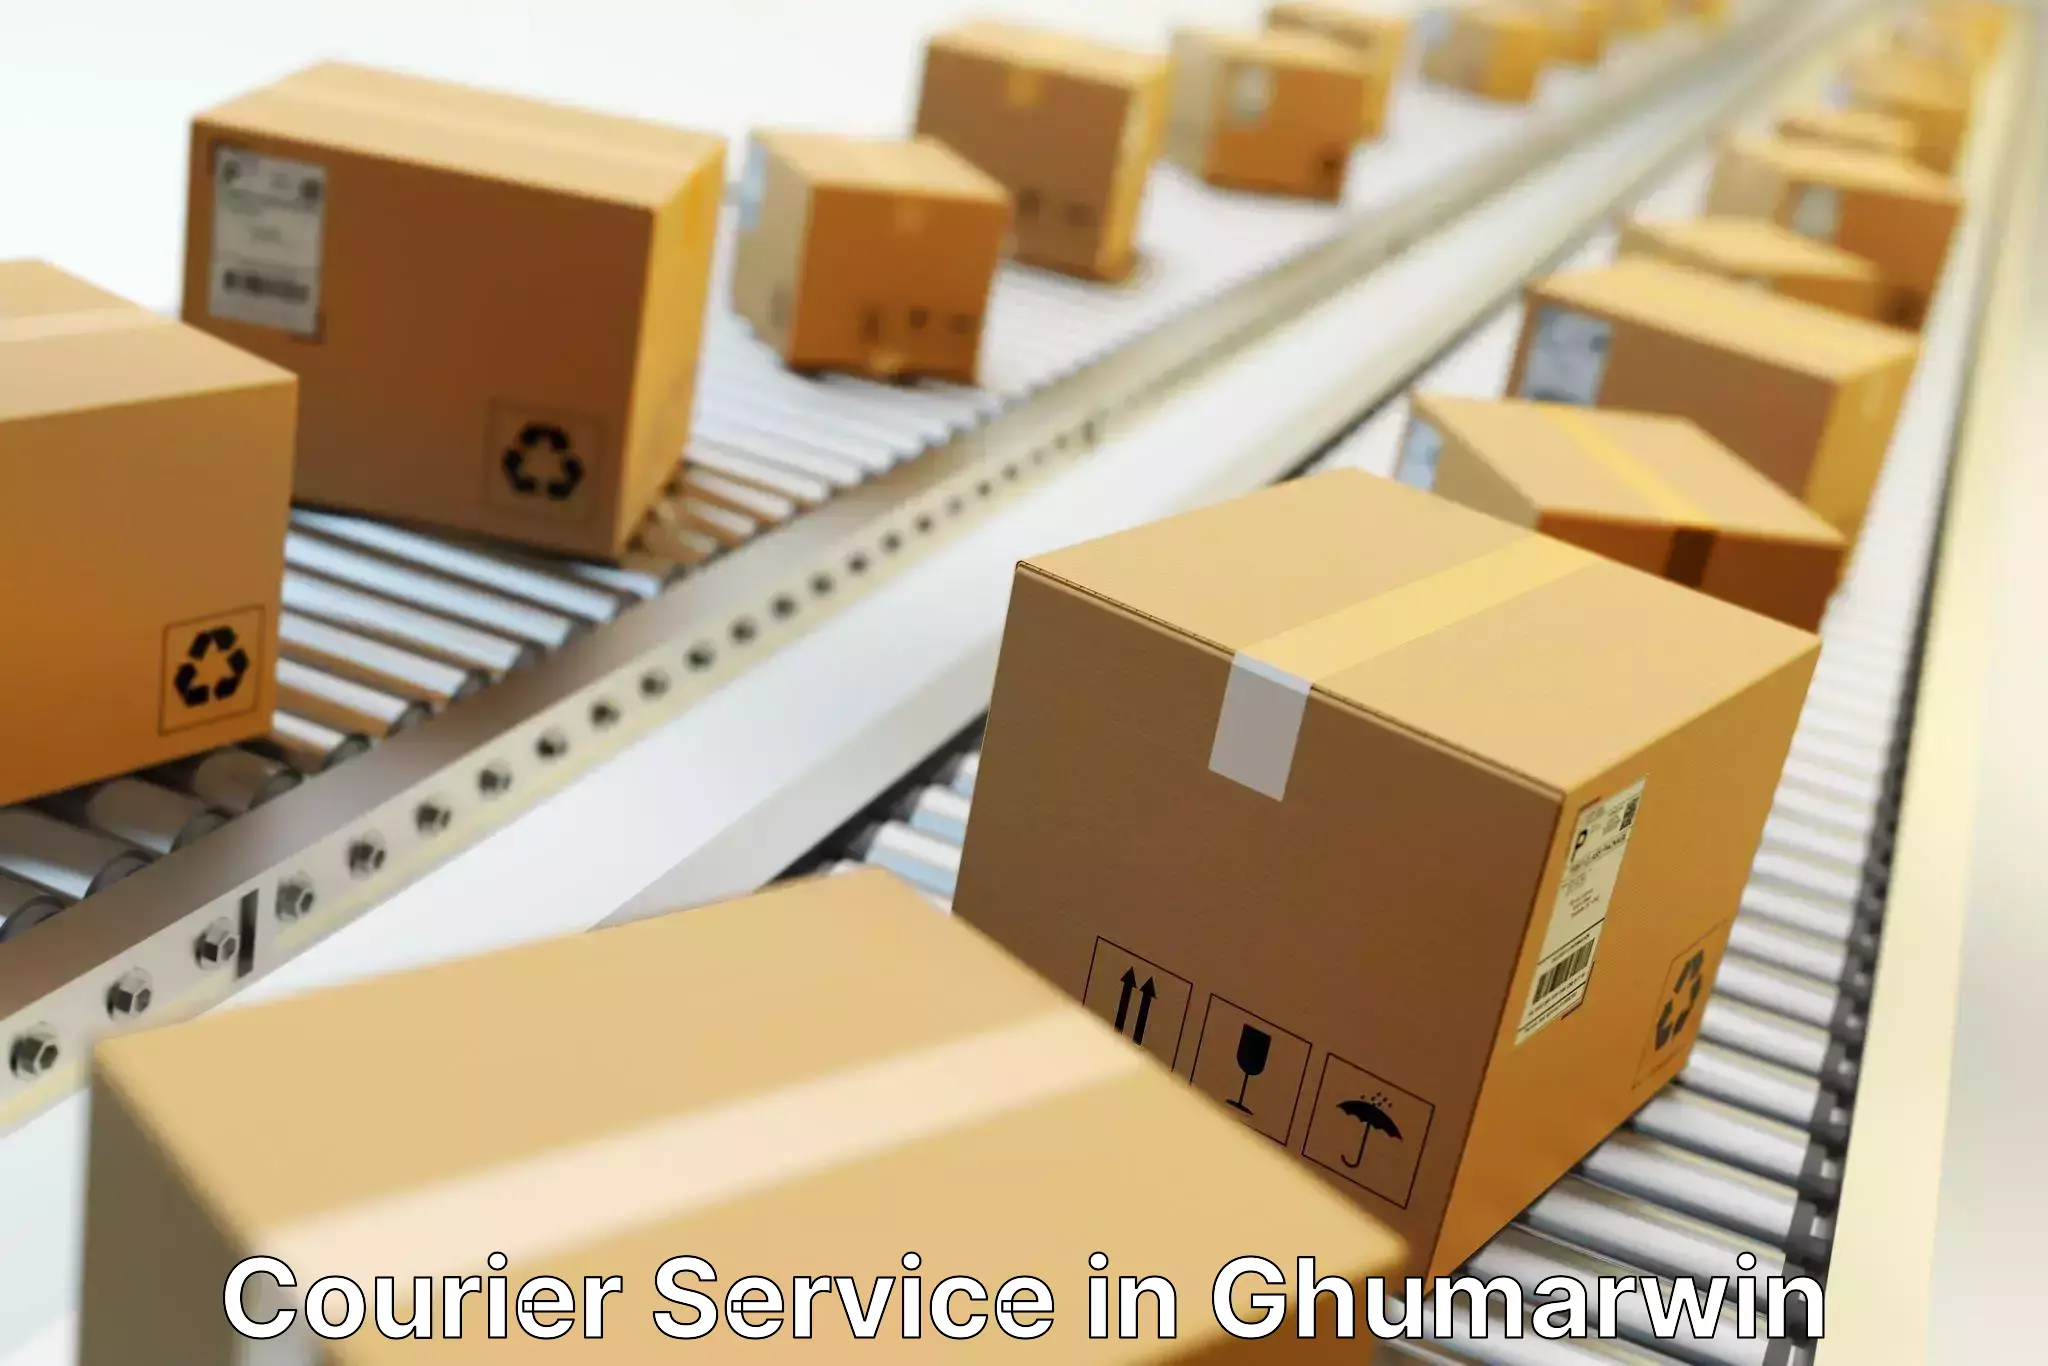 Air courier services in Ghumarwin